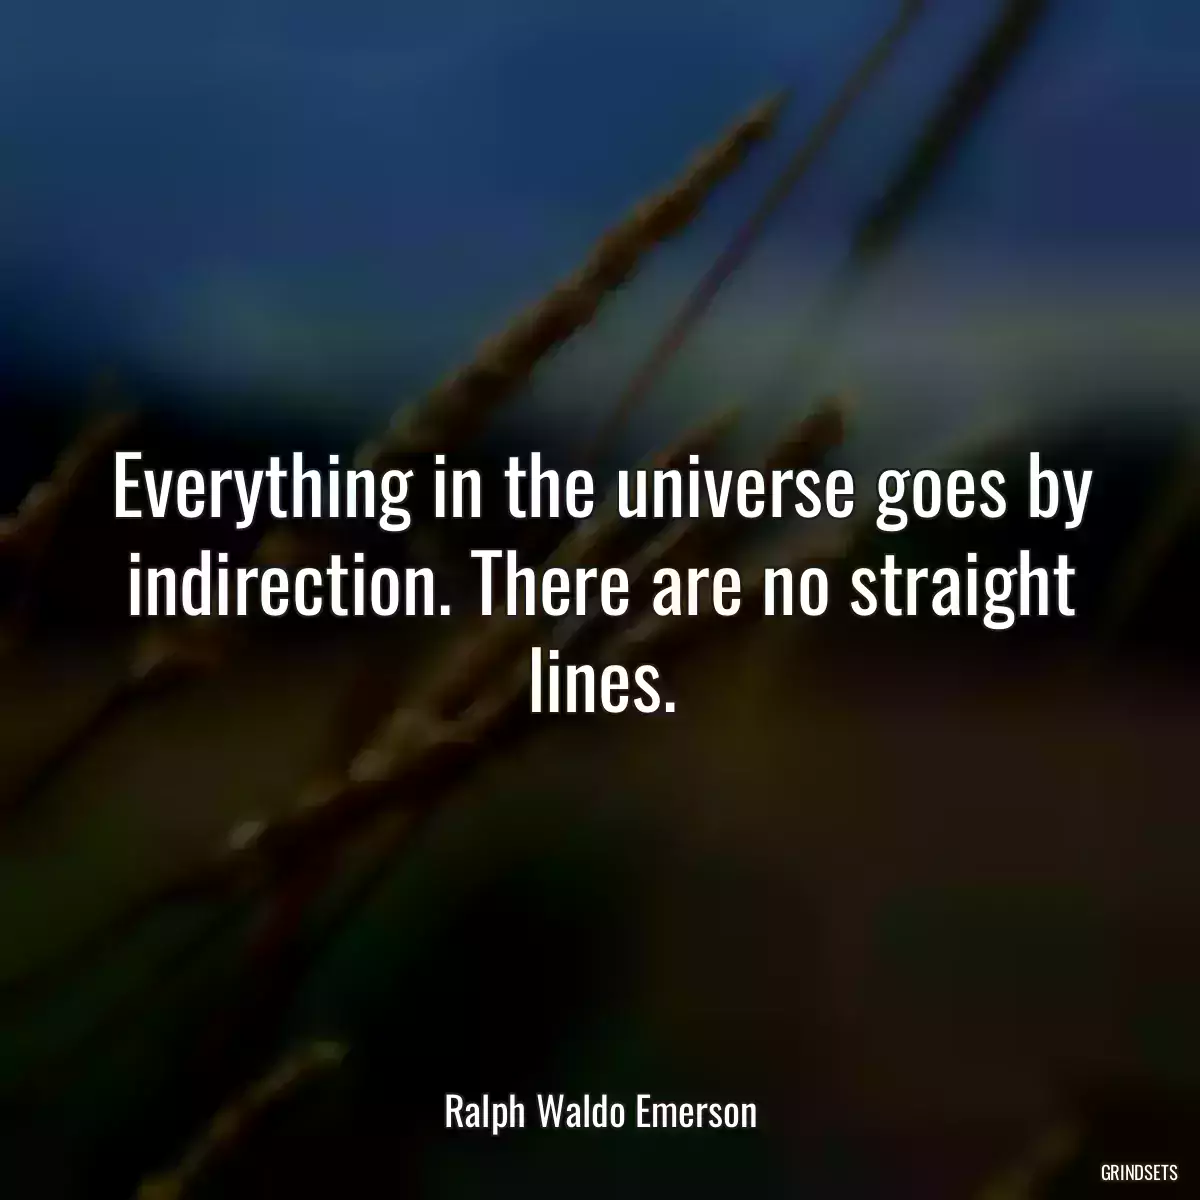 Everything in the universe goes by indirection. There are no straight lines.